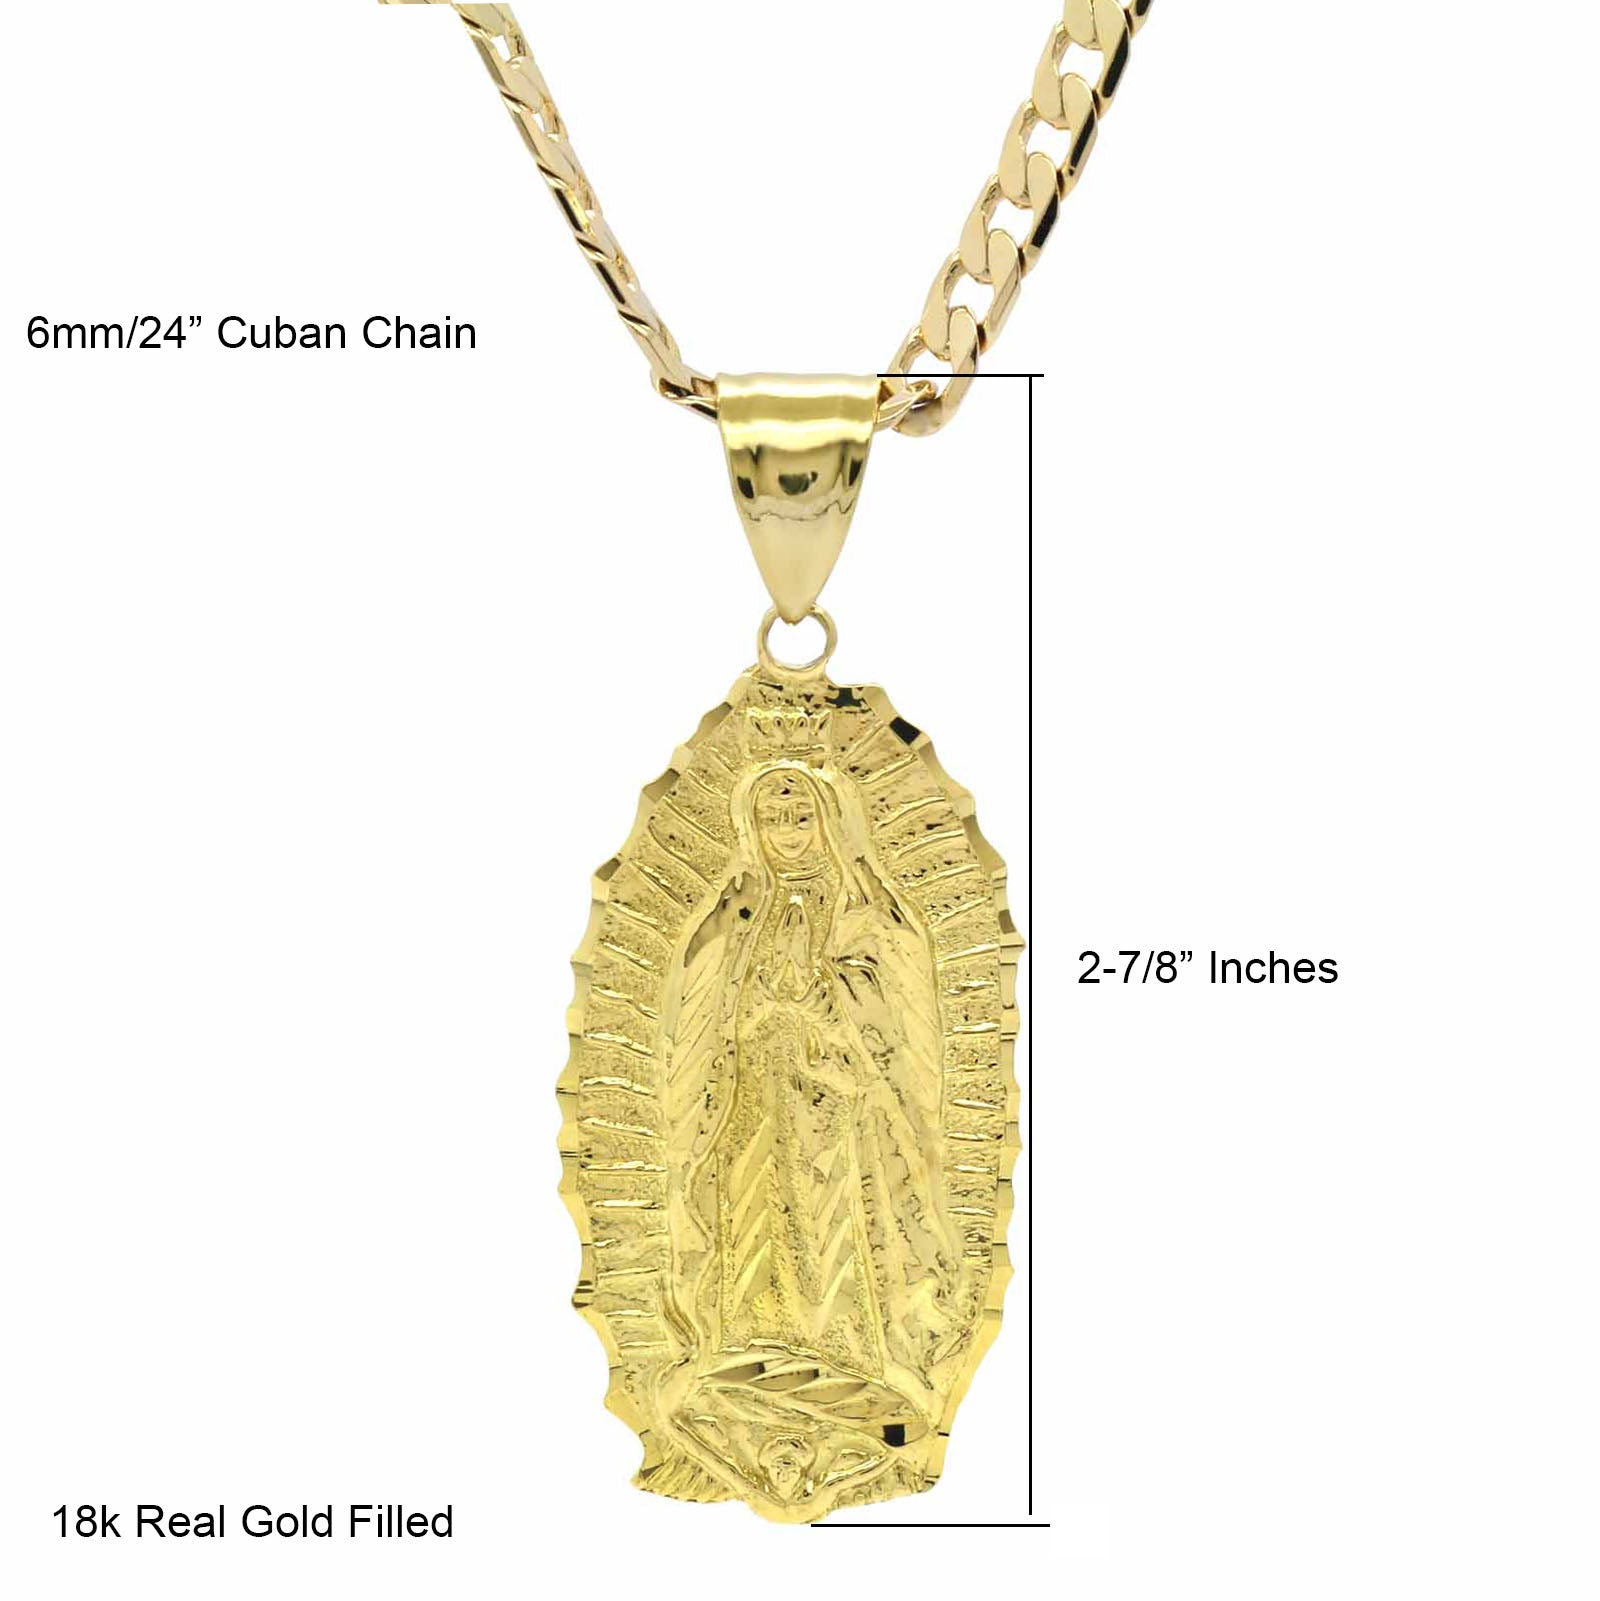 VIRGIN MARY GUADALUPE LARGE PENDANT